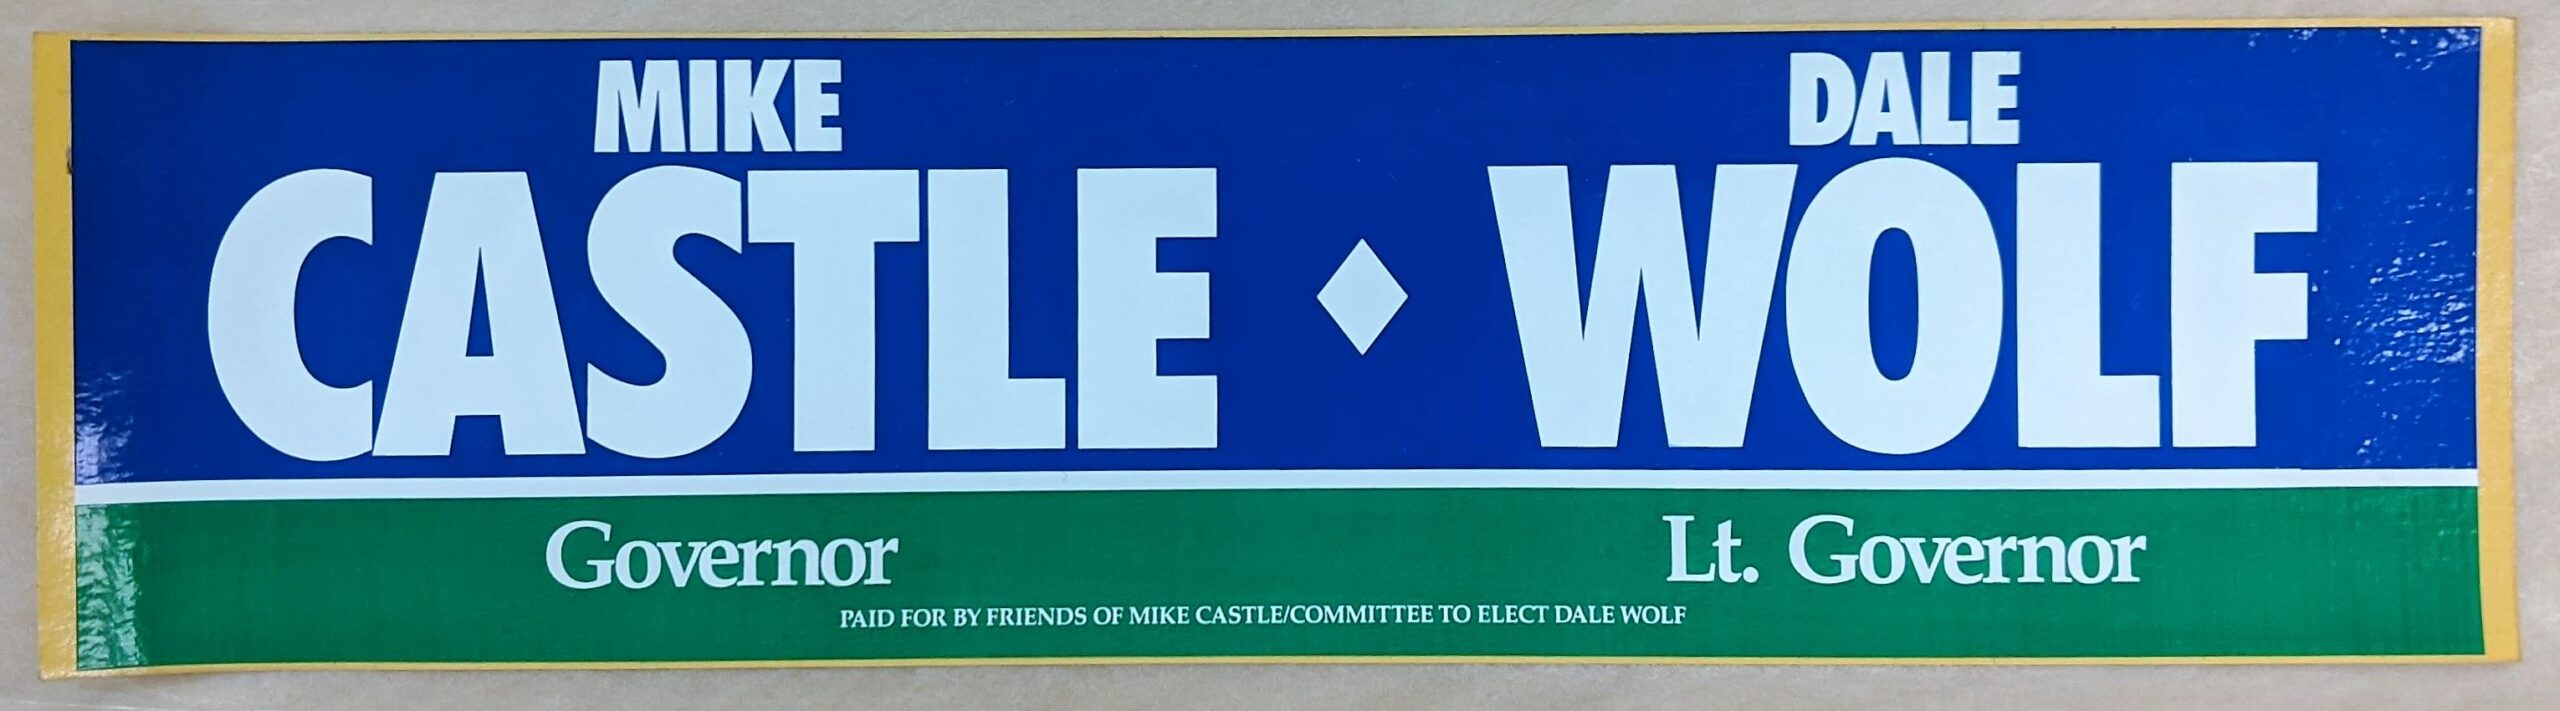 Creator unknown, “Mike Castle and Dick Wolf, Governor and Lt. Governor” bumper sticker, 1988, from the Jerome O. Herlihy political campaign ephemera collection